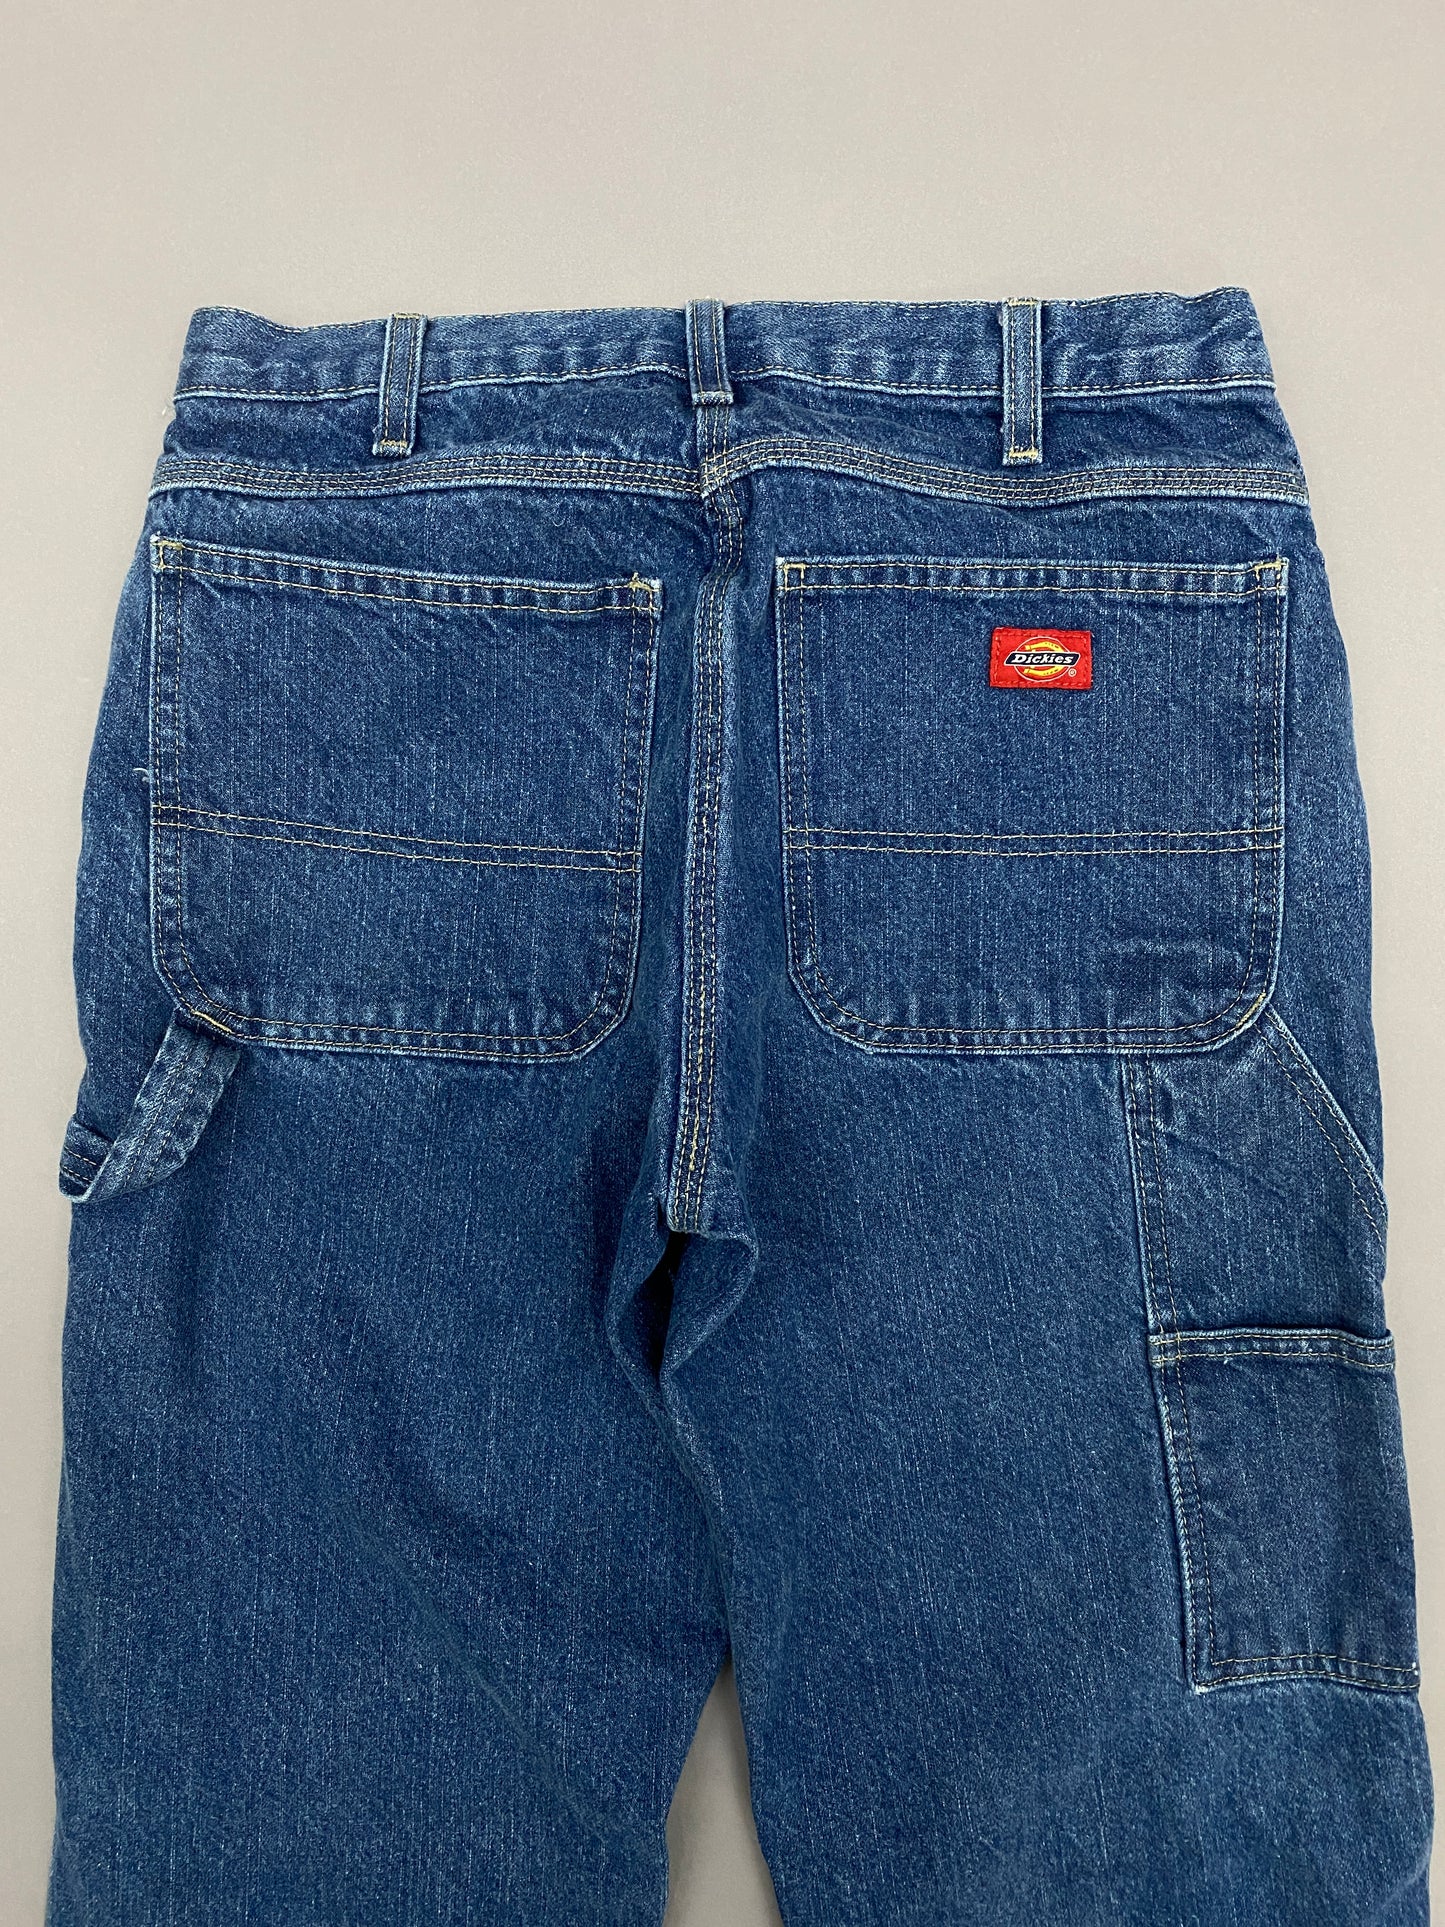 Lined Dickies Carpenter Pants - vintage by magichollow - made in  usa//single stitch